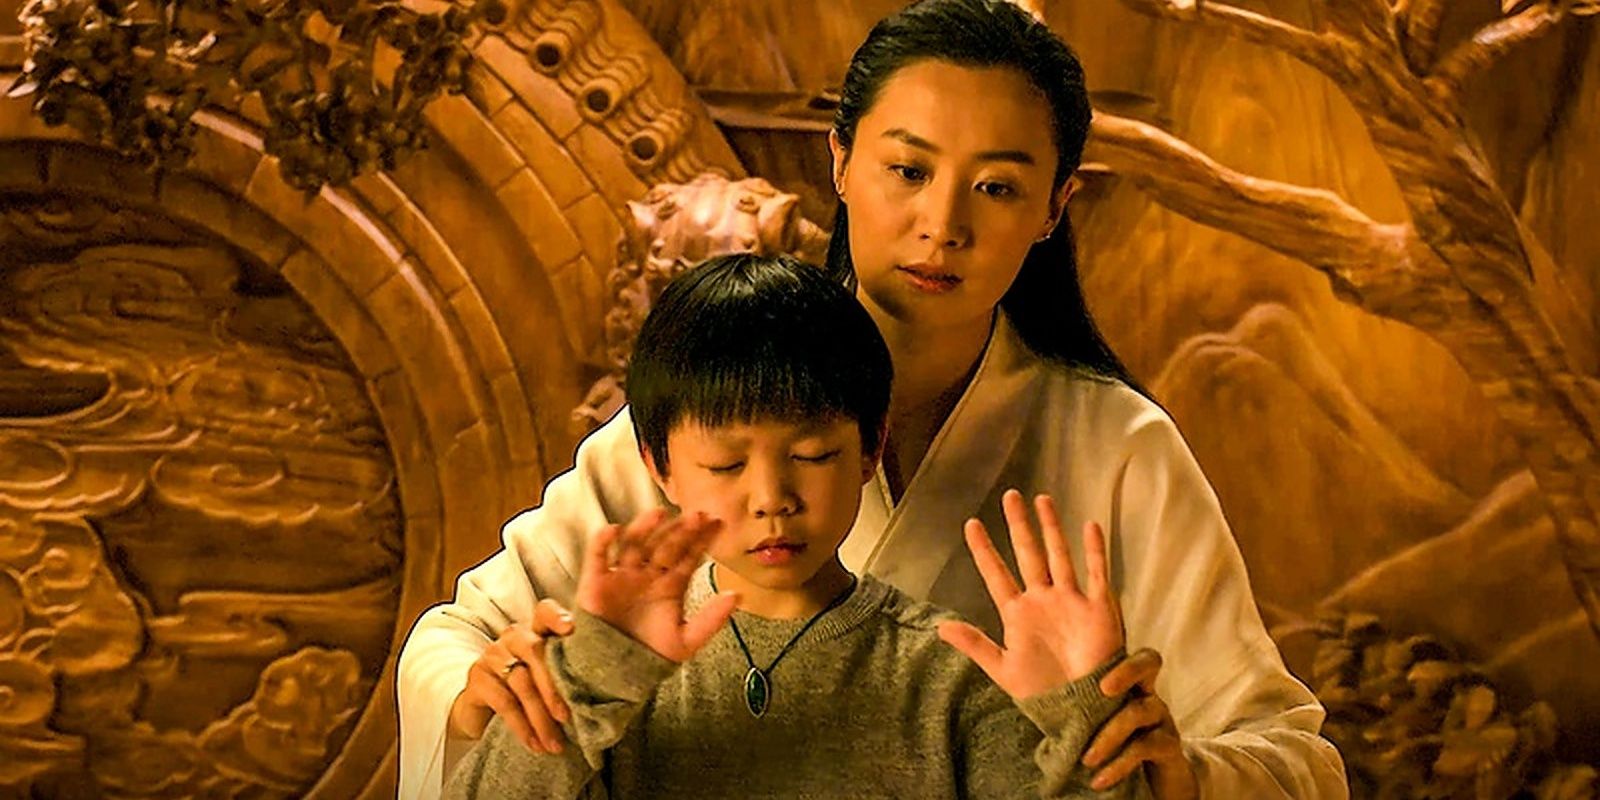 Shang-Chi's mother trains him as a child